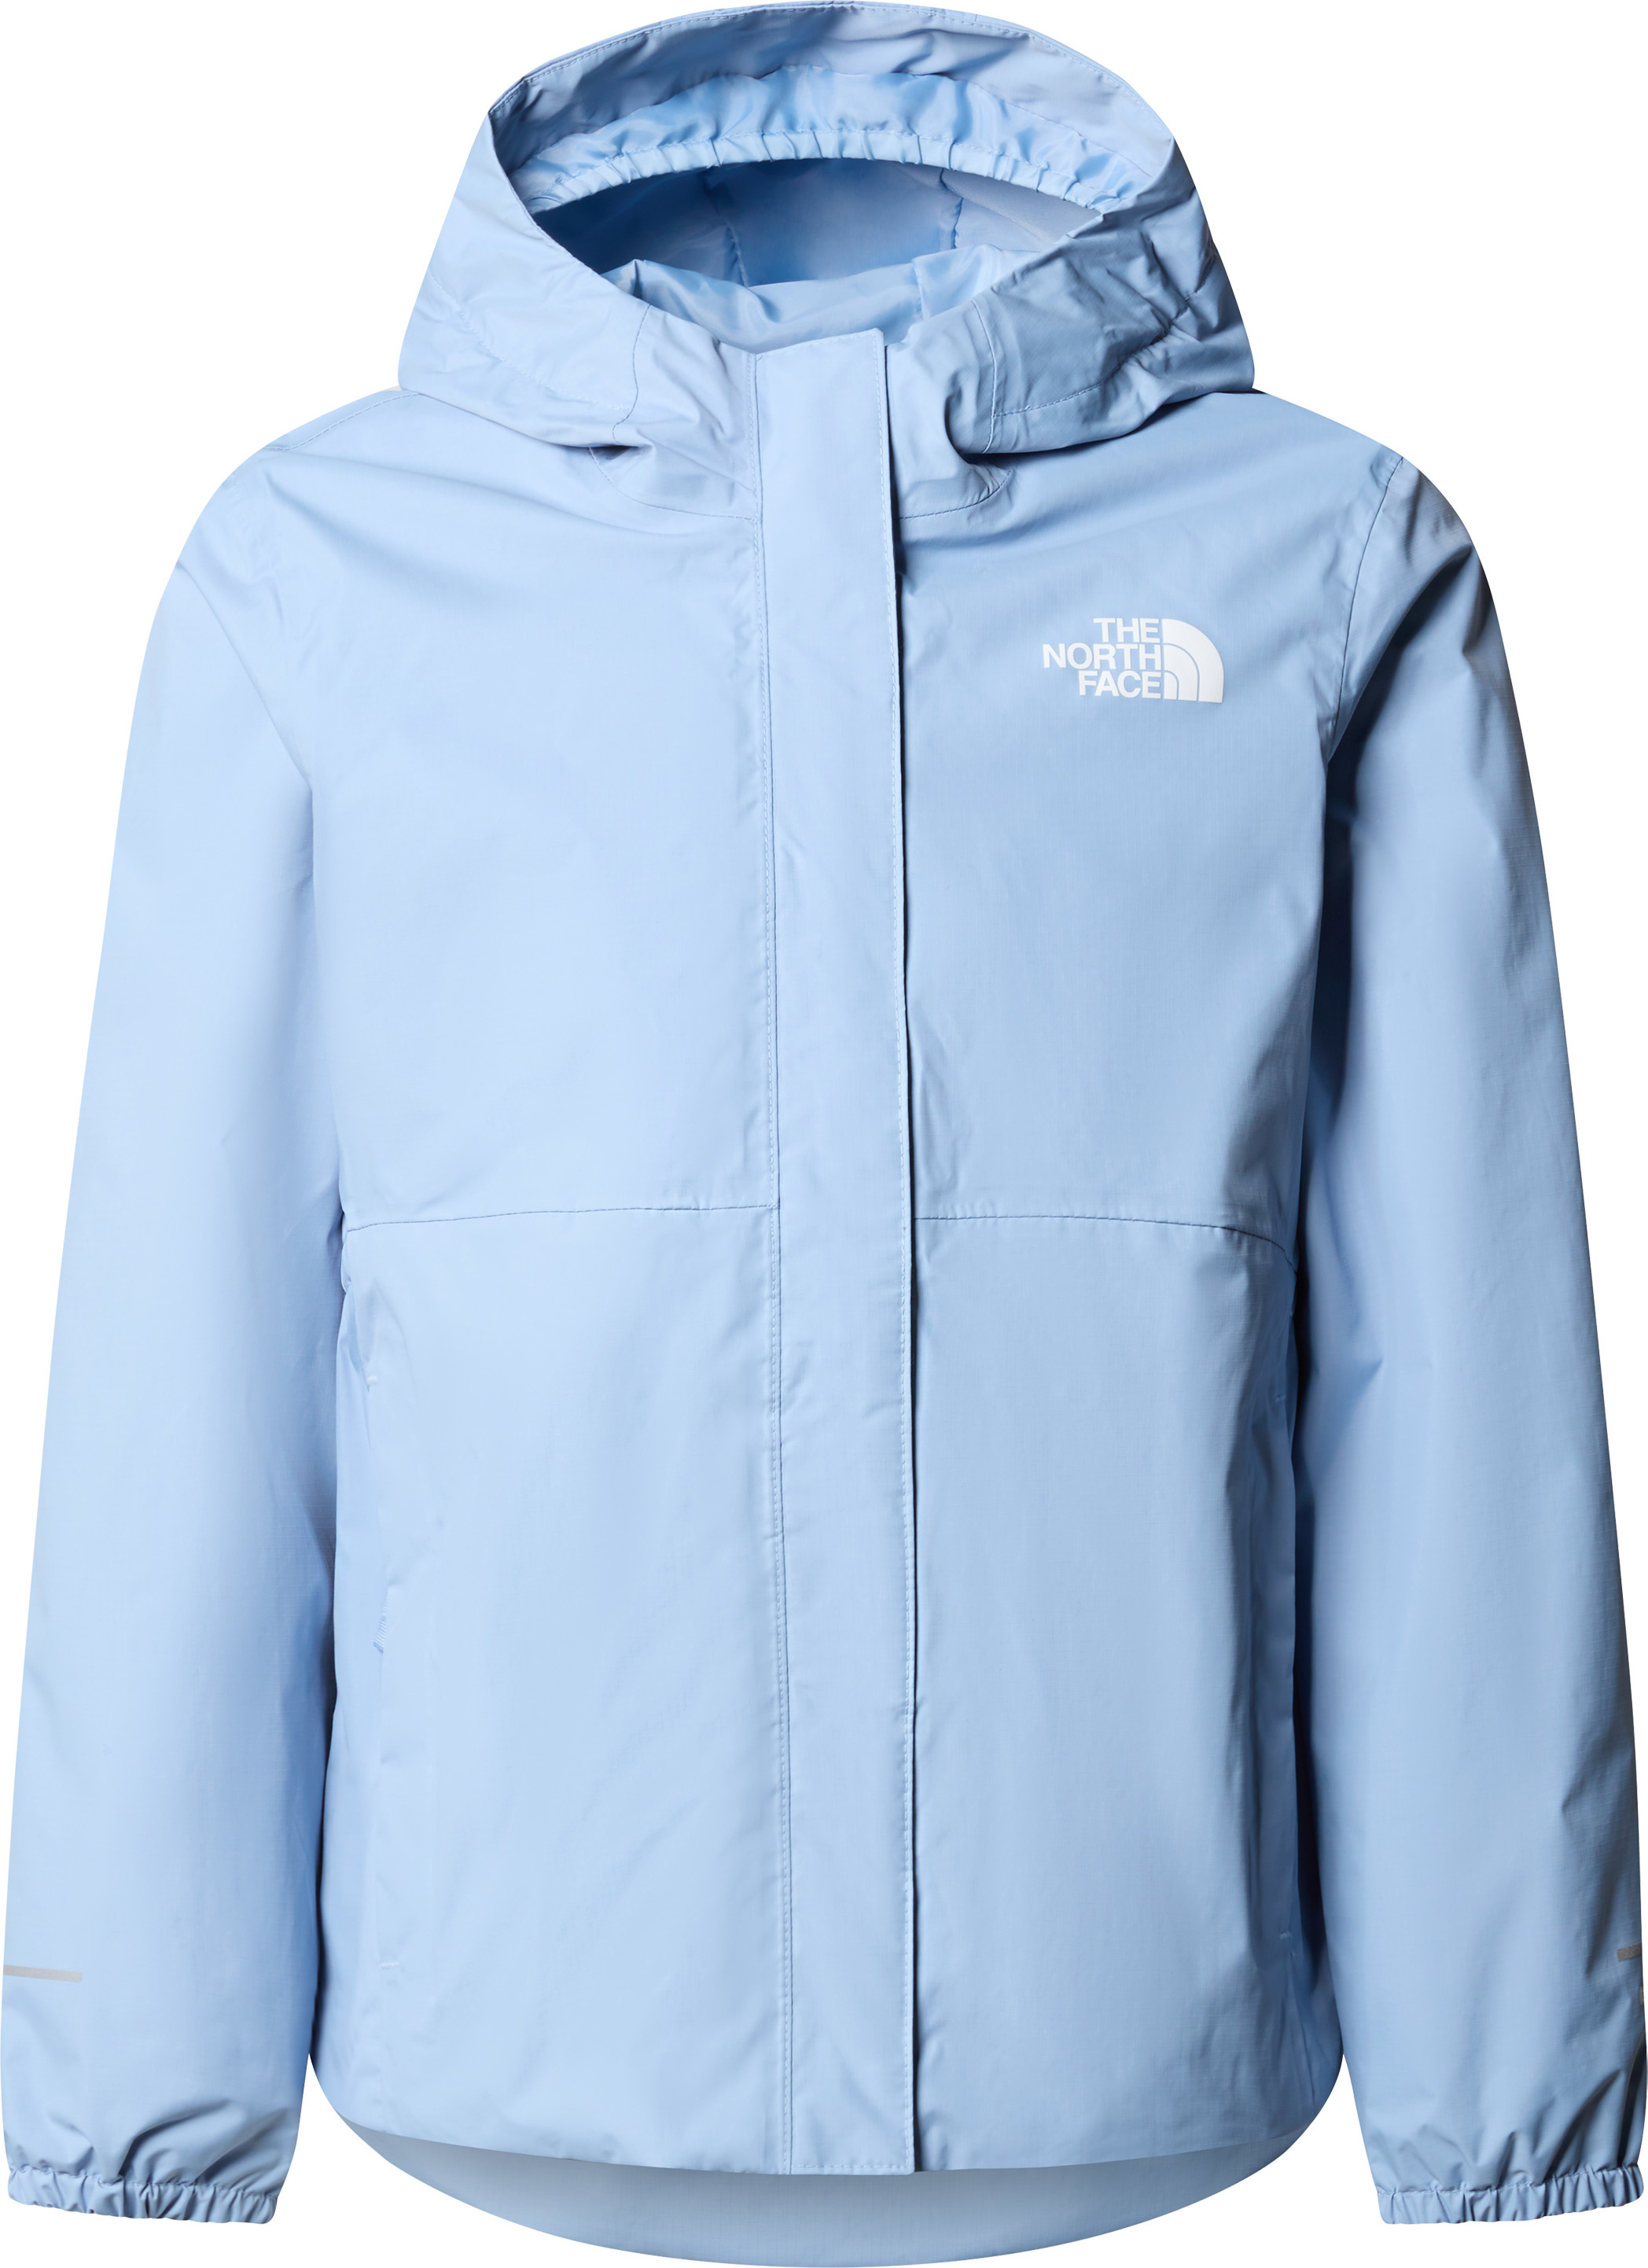 The North Face The North Face G Antora Rain Jacket Steel Blue L, Steel Blue